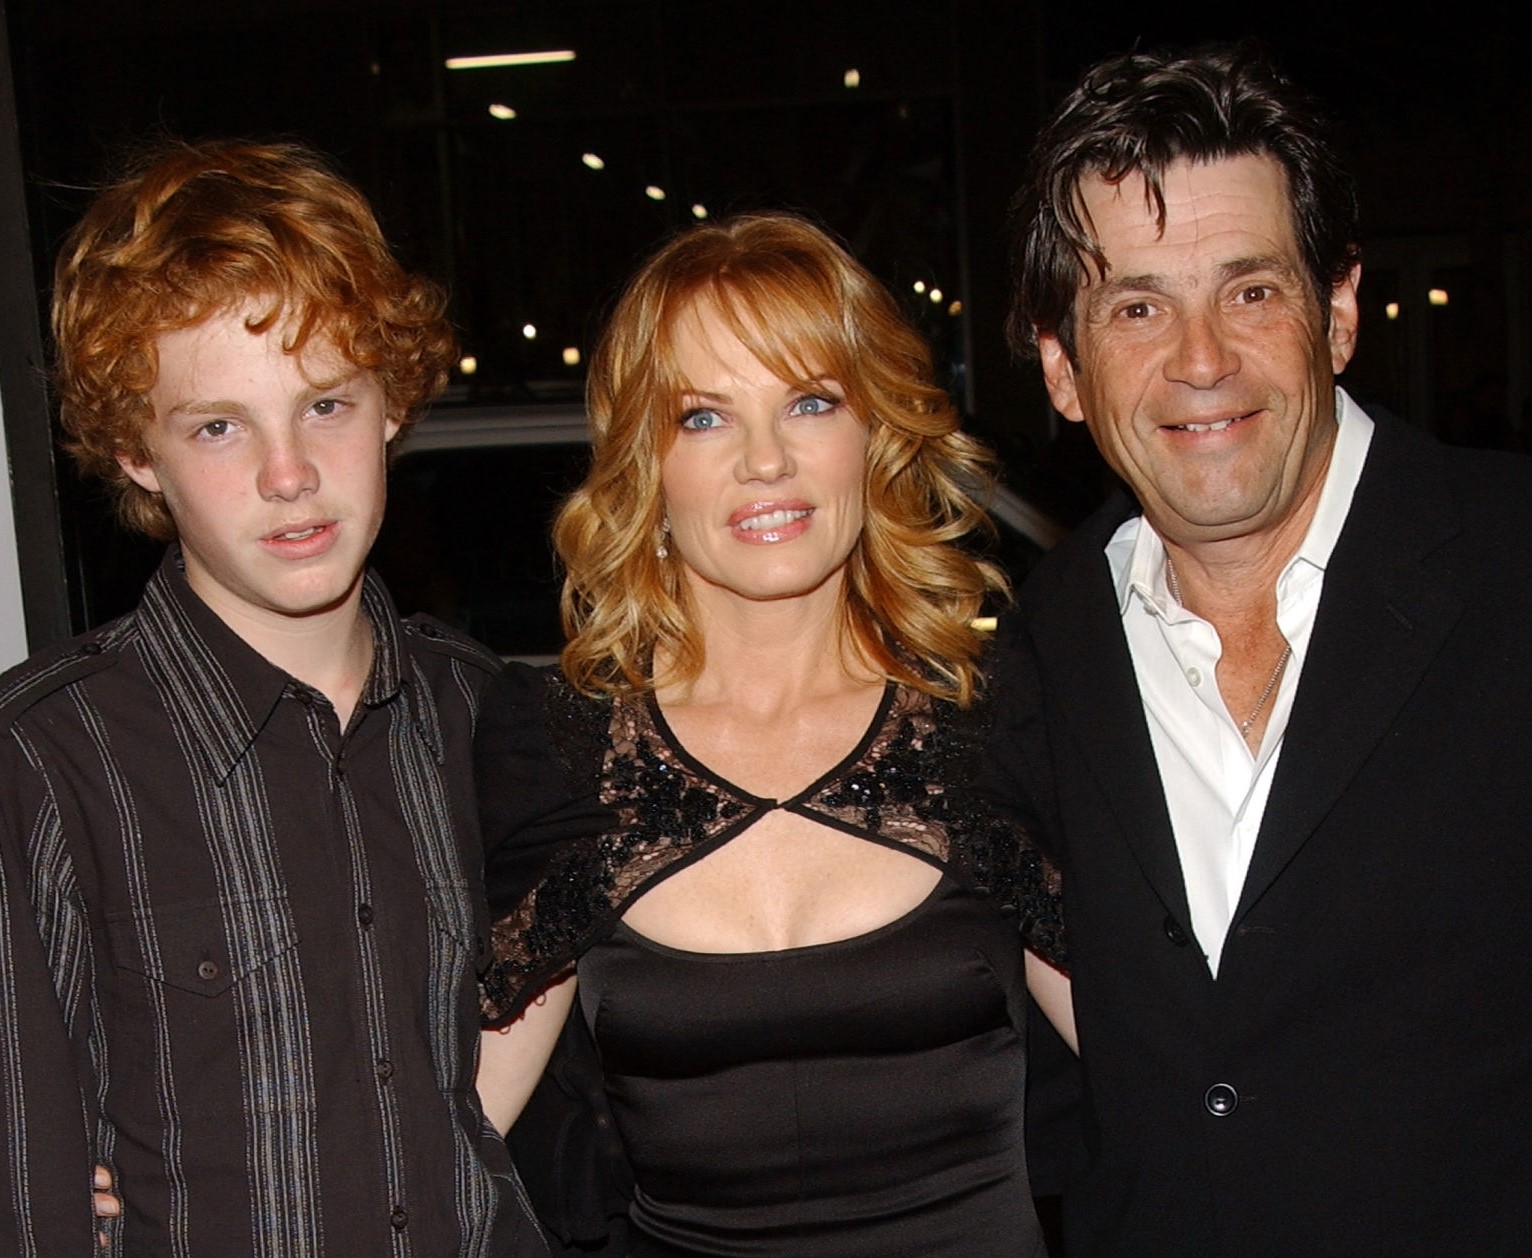 CSI: Immortality star, Helgenberger with her ex-husband and son, Hugh, attending an award show.